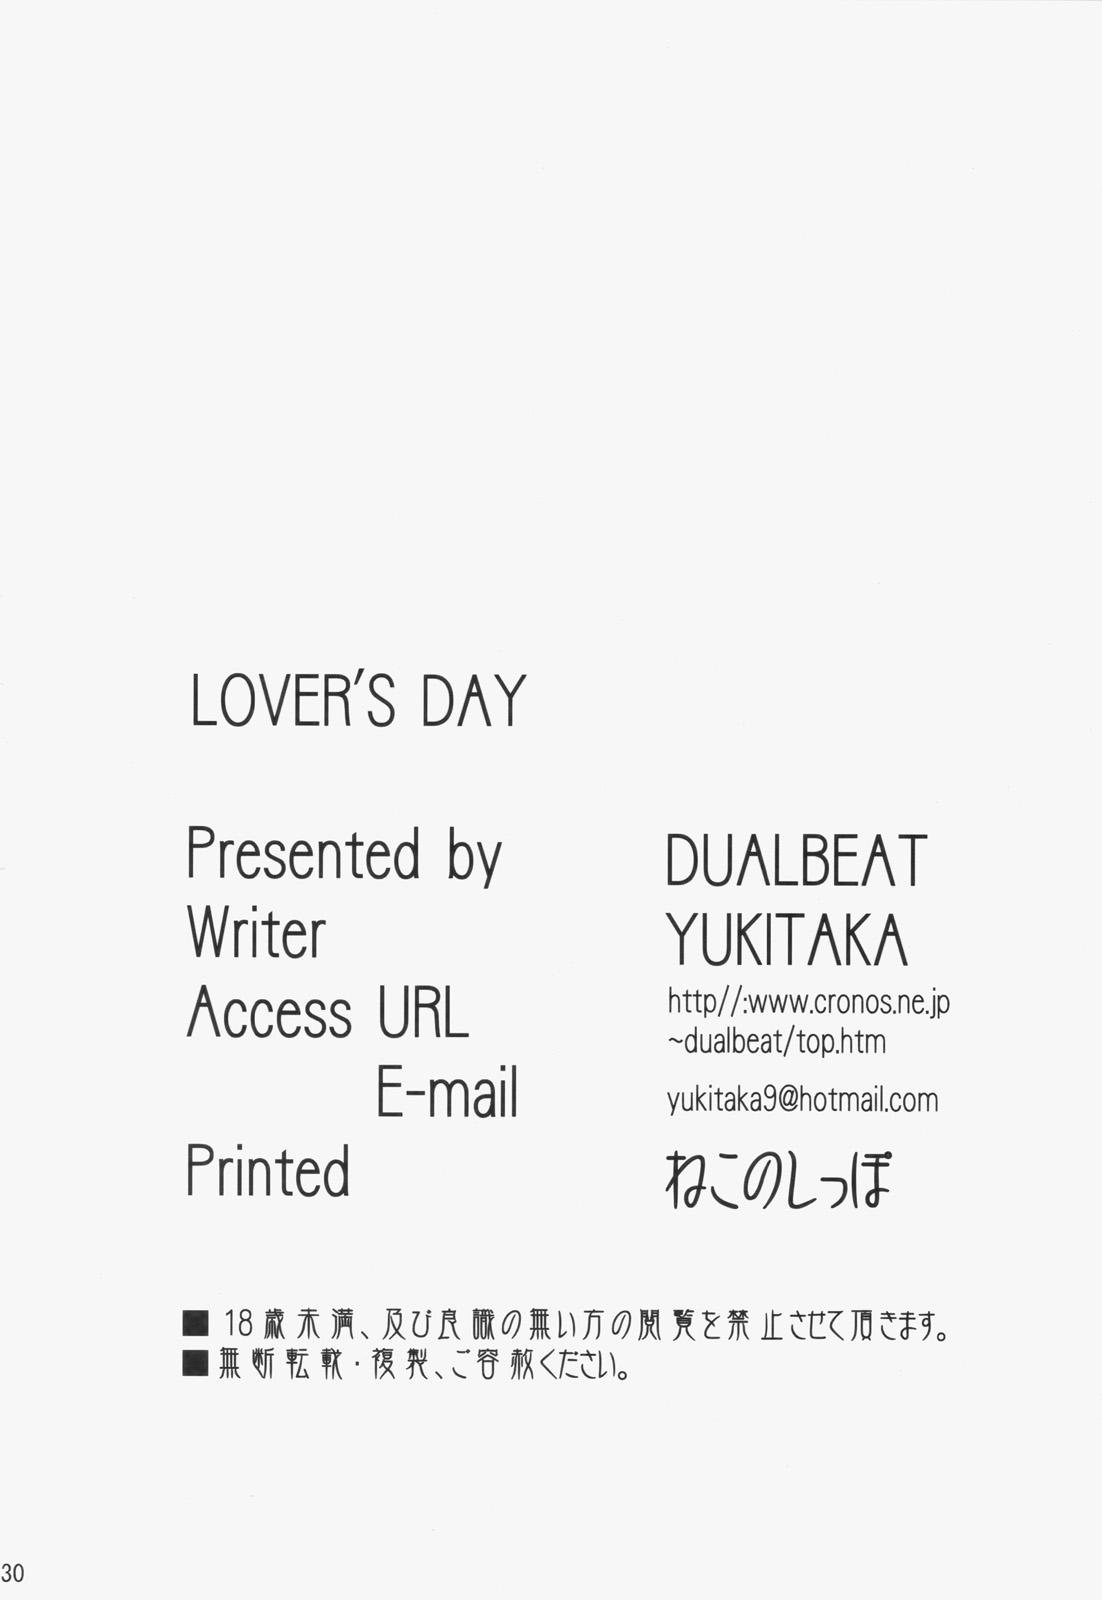 LOVER'S DAY 28